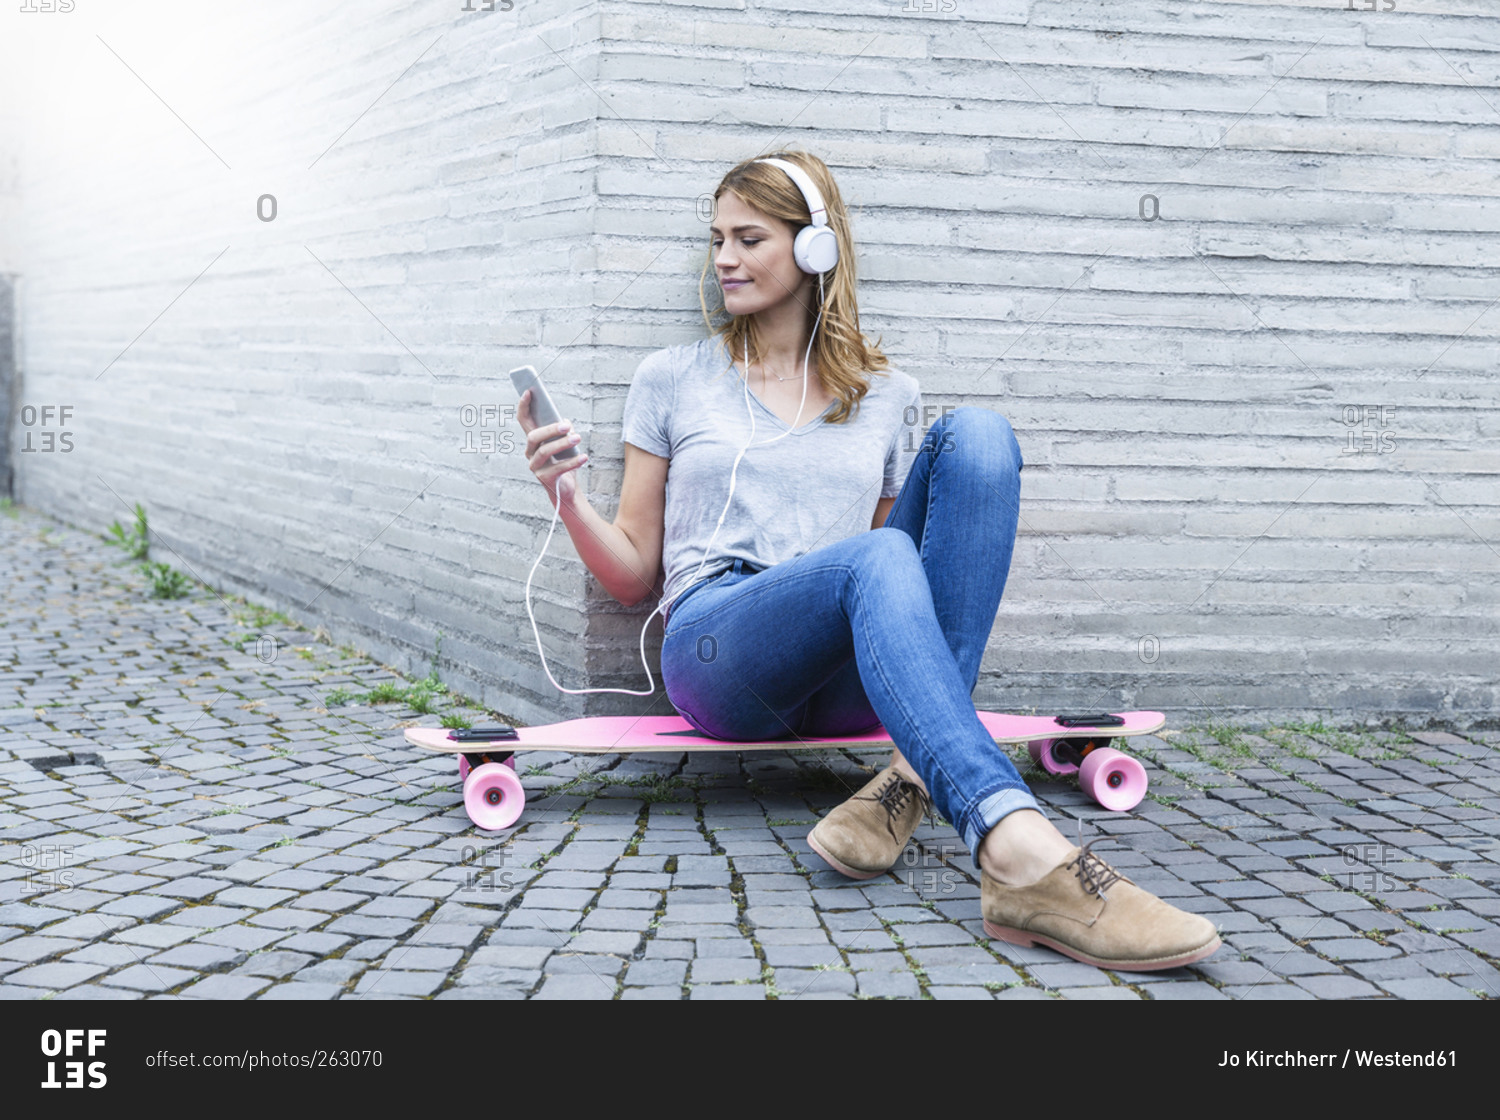 Young woman sitting on pink skateboard listening to music